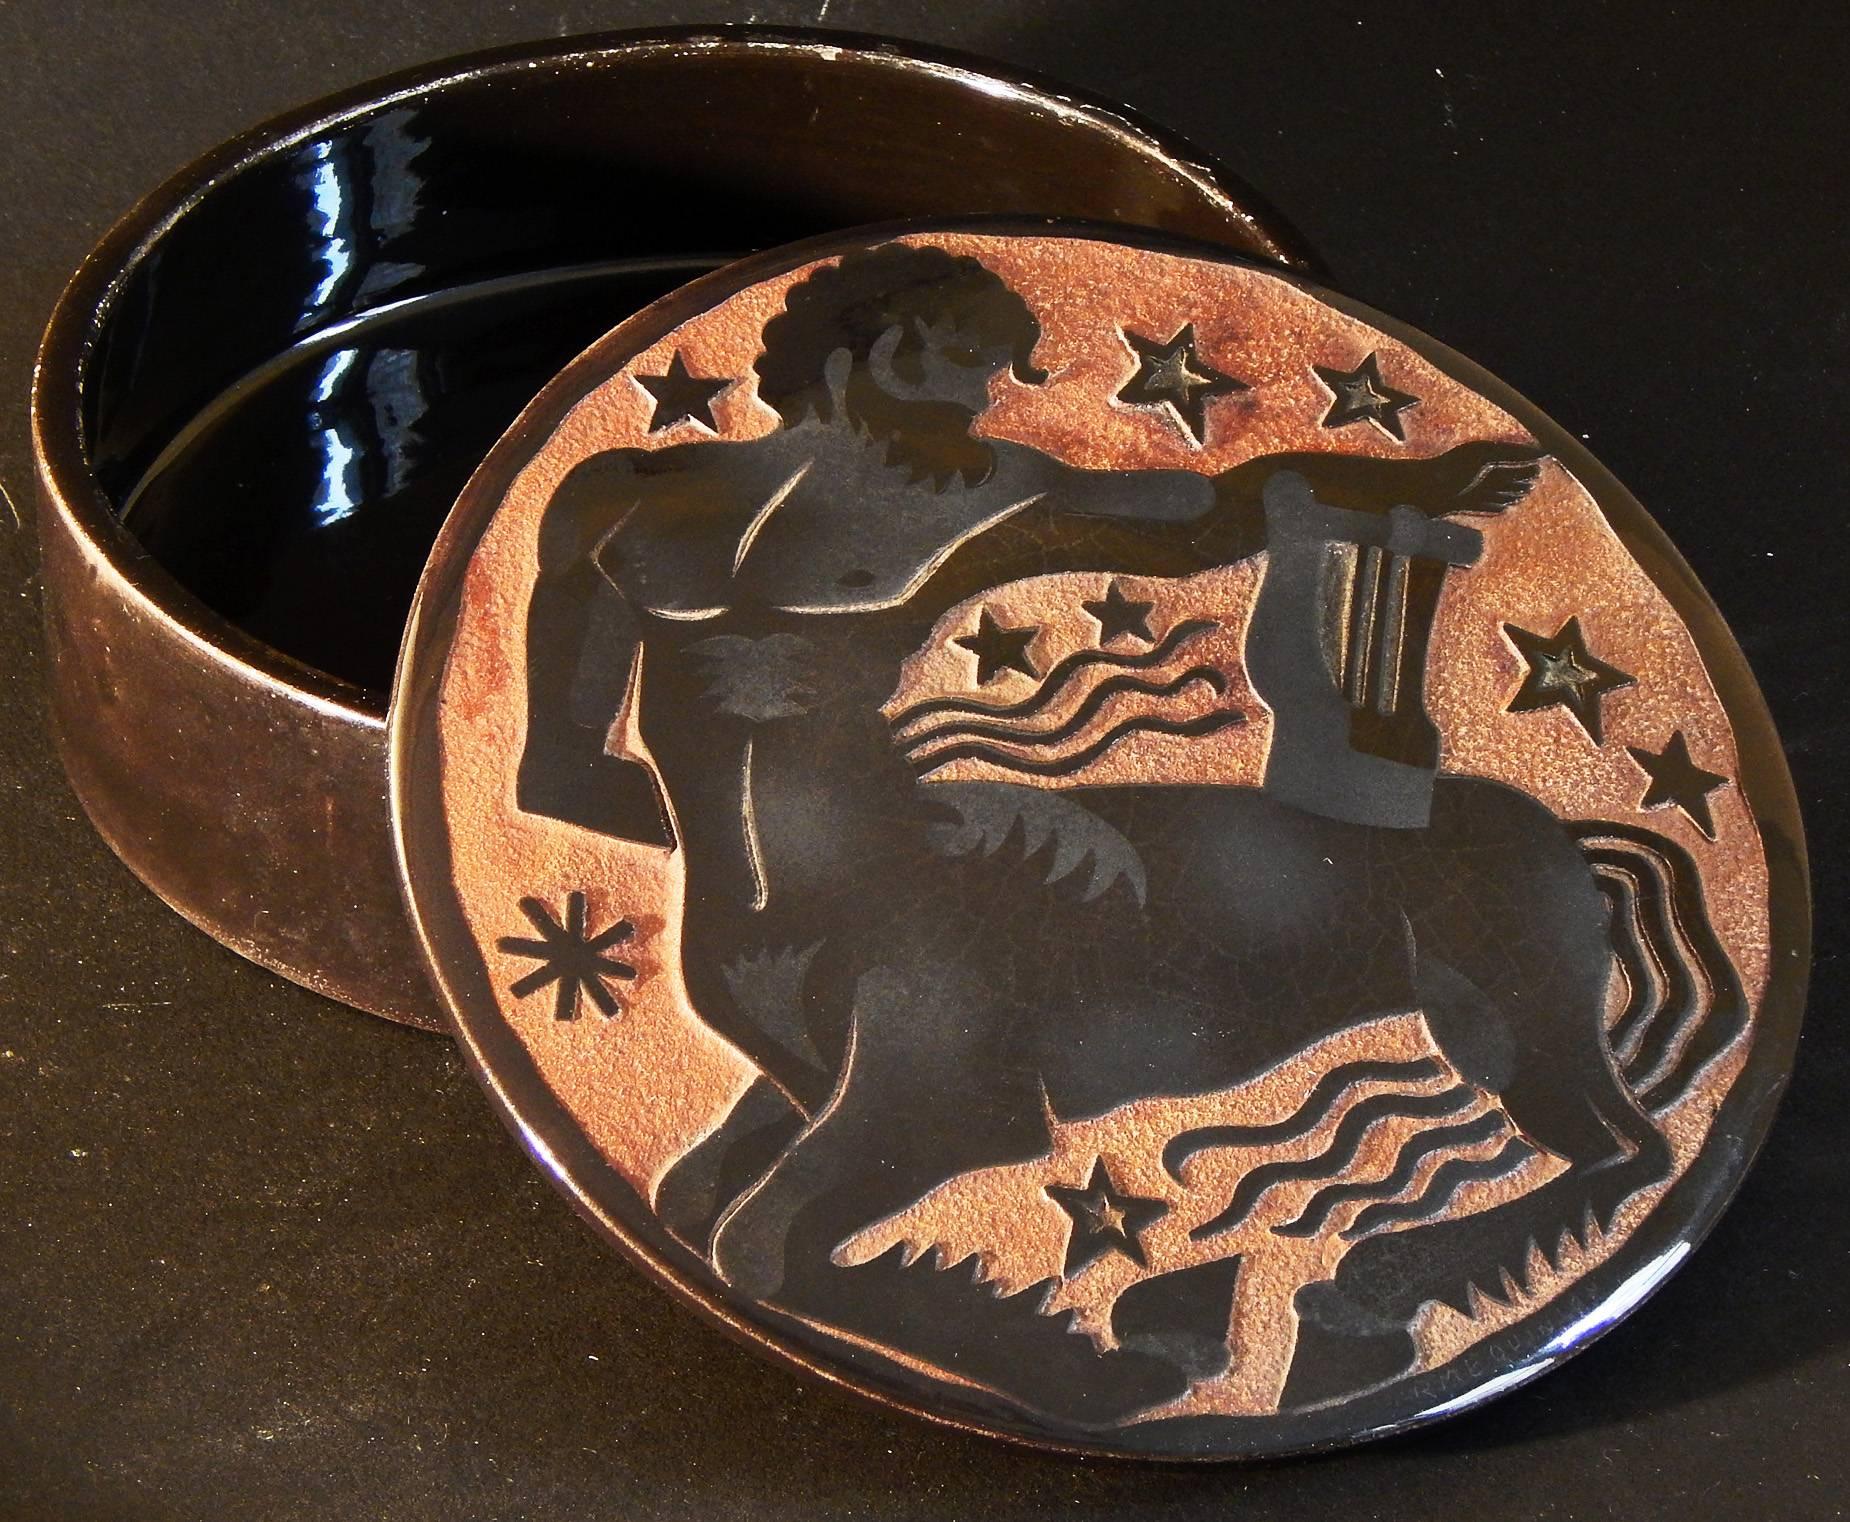 Striking and beautifully crafted, this ceramic, bas relief box depicts a centaur holding a harp, with a series of stars overhead no doubt symbolizing the Zodiac sign of Sagittarius. The artist, Roger Mequinion, was one of the first sculptors to work